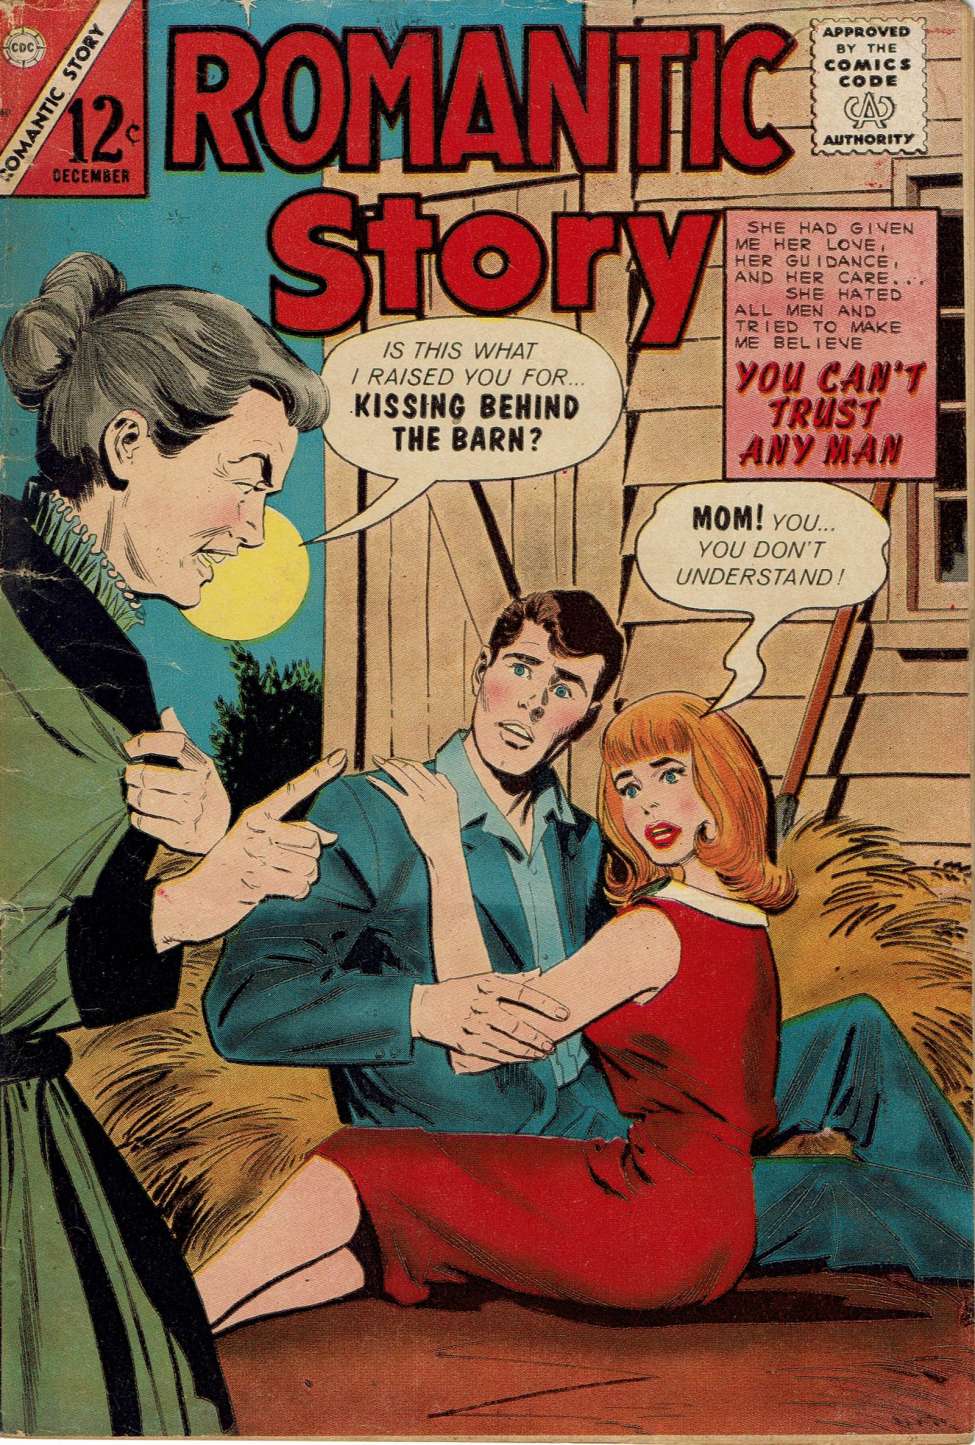 Book Cover For Romantic Story 80